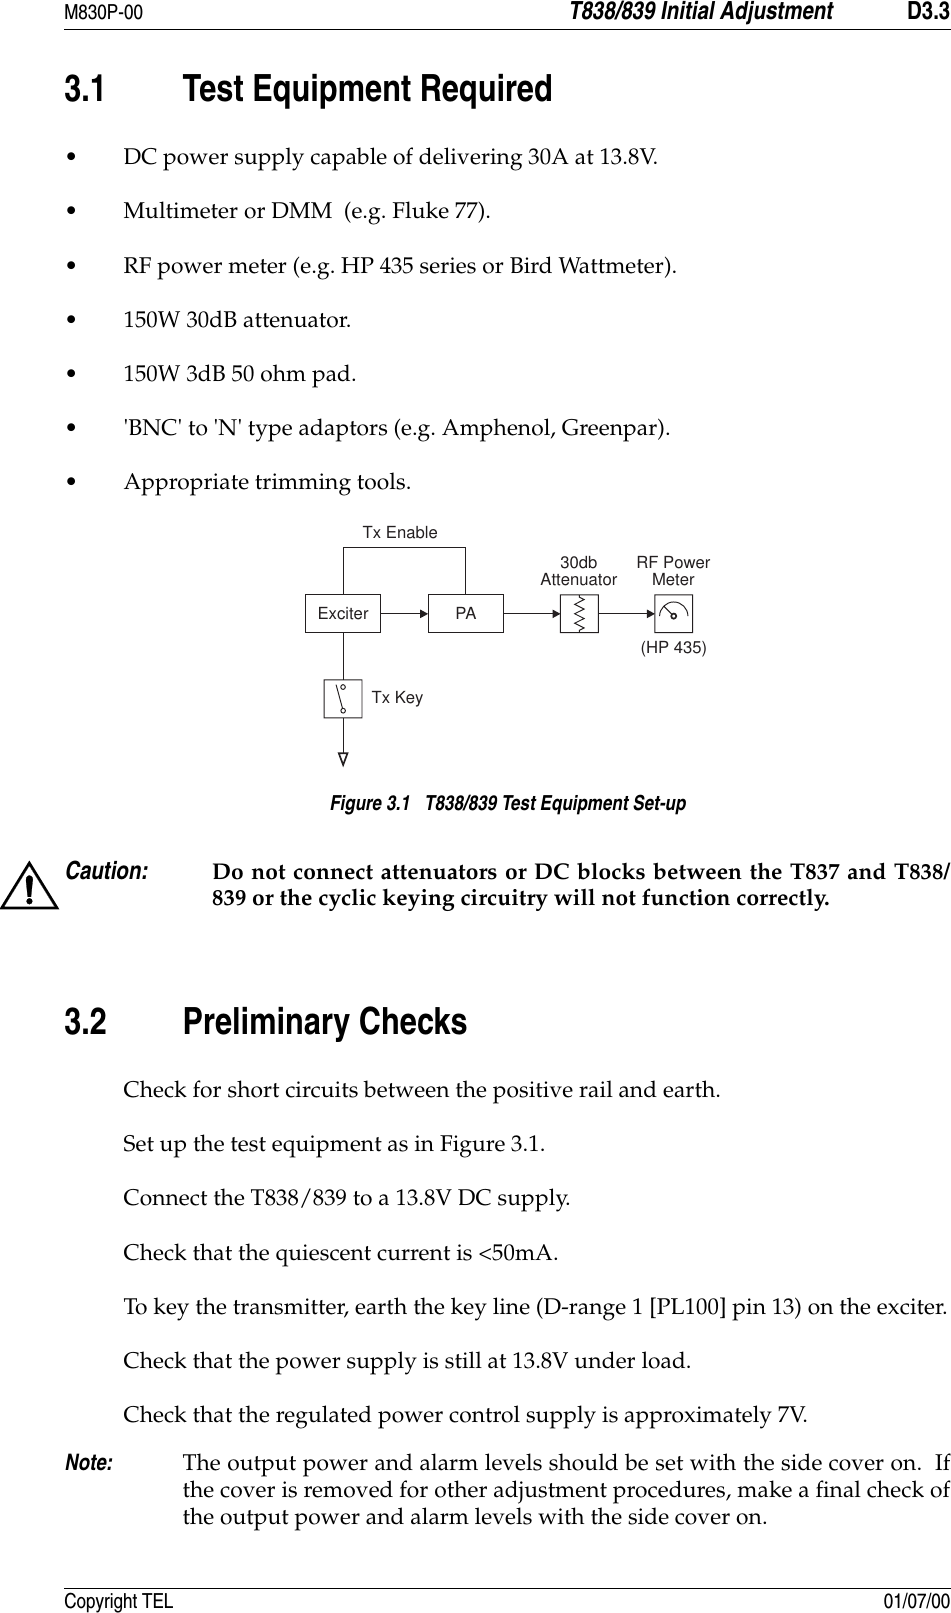 M830P-00 T838/839 Initial Adjustment D3.3Copyright TEL 01/07/003.1 Test Equipment Required• DC power supply capable of delivering 30A at 13.8V.• Multimeter or DMM  (e.g. Fluke 77).• RF power meter (e.g. HP 435 series or Bird Wattmeter). • 150W 30dB attenuator. • 150W 3dB 50 ohm pad. • &apos;BNC&apos; to &apos;N&apos; type adaptors (e.g. Amphenol, Greenpar). • Appropriate trimming tools. Figure 3.1   T838/839 Test Equipment Set-upCaution: Do not connect attenuators or DC blocks between the T837 and T838/839 or the cyclic keying circuitry will not function correctly.3.2 Preliminary ChecksCheck for short circuits between the positive rail and earth.Set up the test equipment as in Figure 3.1.Connect the T838/839 to a 13.8V DC supply.Check that the quiescent current is &lt;50mA.To key the transmitter, earth the key line (D-range 1 [PL100] pin 13) on the exciter.Check that the power supply is still at 13.8V under load.Check that the regulated power control supply is approximately 7V.Note: The output power and alarm levels should be set with the side cover on.  Ifthe cover is removed for other adjustment procedures, make a final check ofthe output power and alarm levels with the side cover on.Exciter PATx KeyRF PowerMeterTx Enable30dbAttenuator(HP 435)